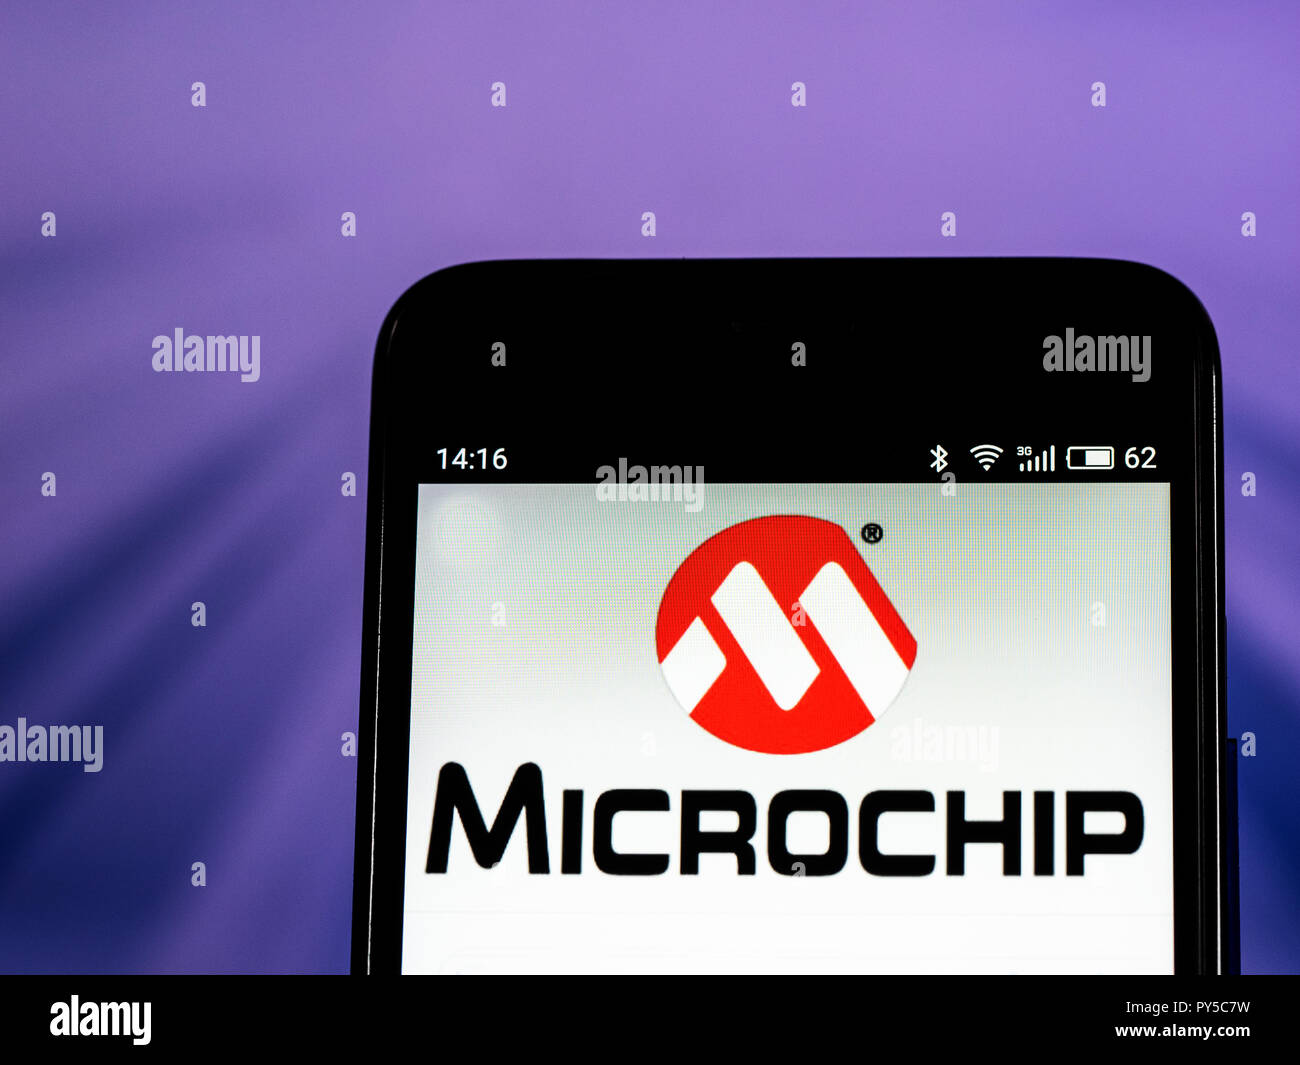 Microchip Technology Corporation logo seen displayed on smart phone. Microchip Technology Inc. is an American publicly-listed corporation that is a manufacturer of microcontroller, mixed-signal, analog and Flash-IP integrated circuits. Stock Photo